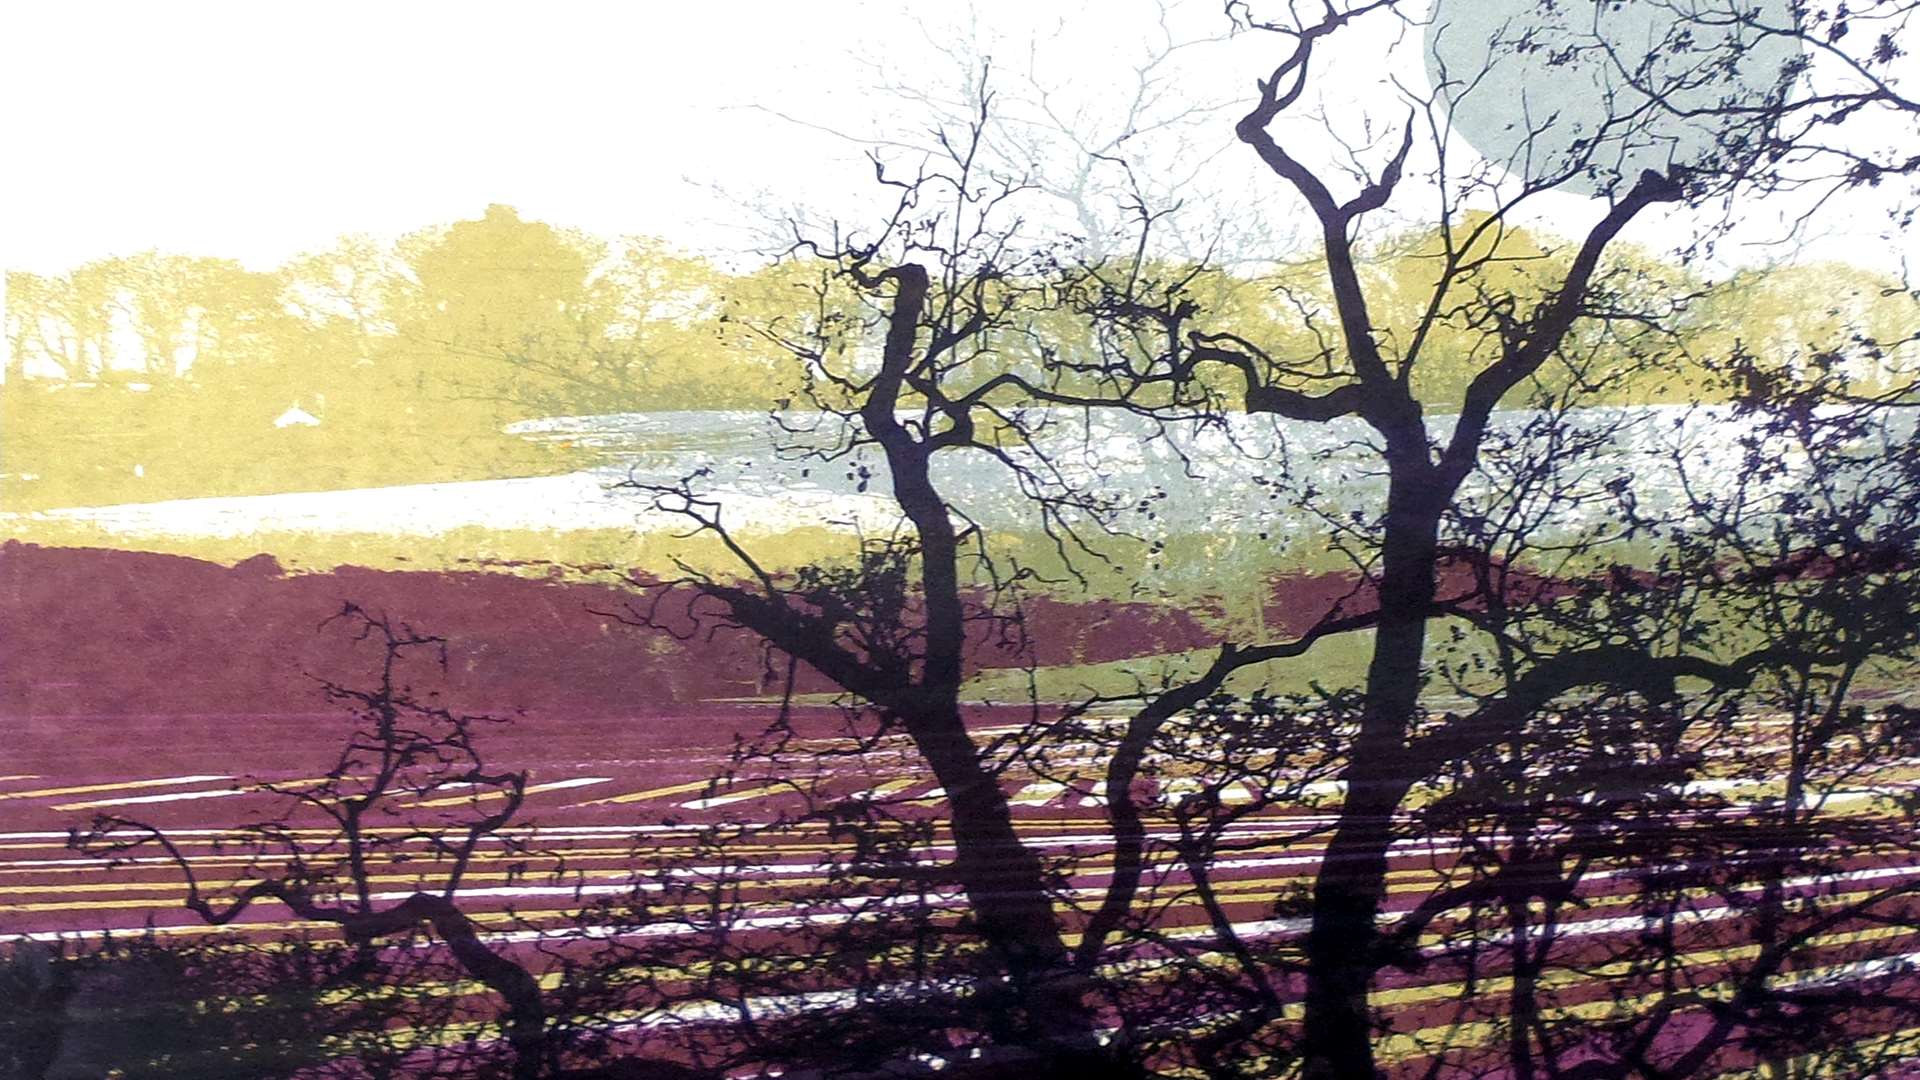 Ruth McDonald's Moonlit Furrows at Stalisfield is part of the Soil exhibition